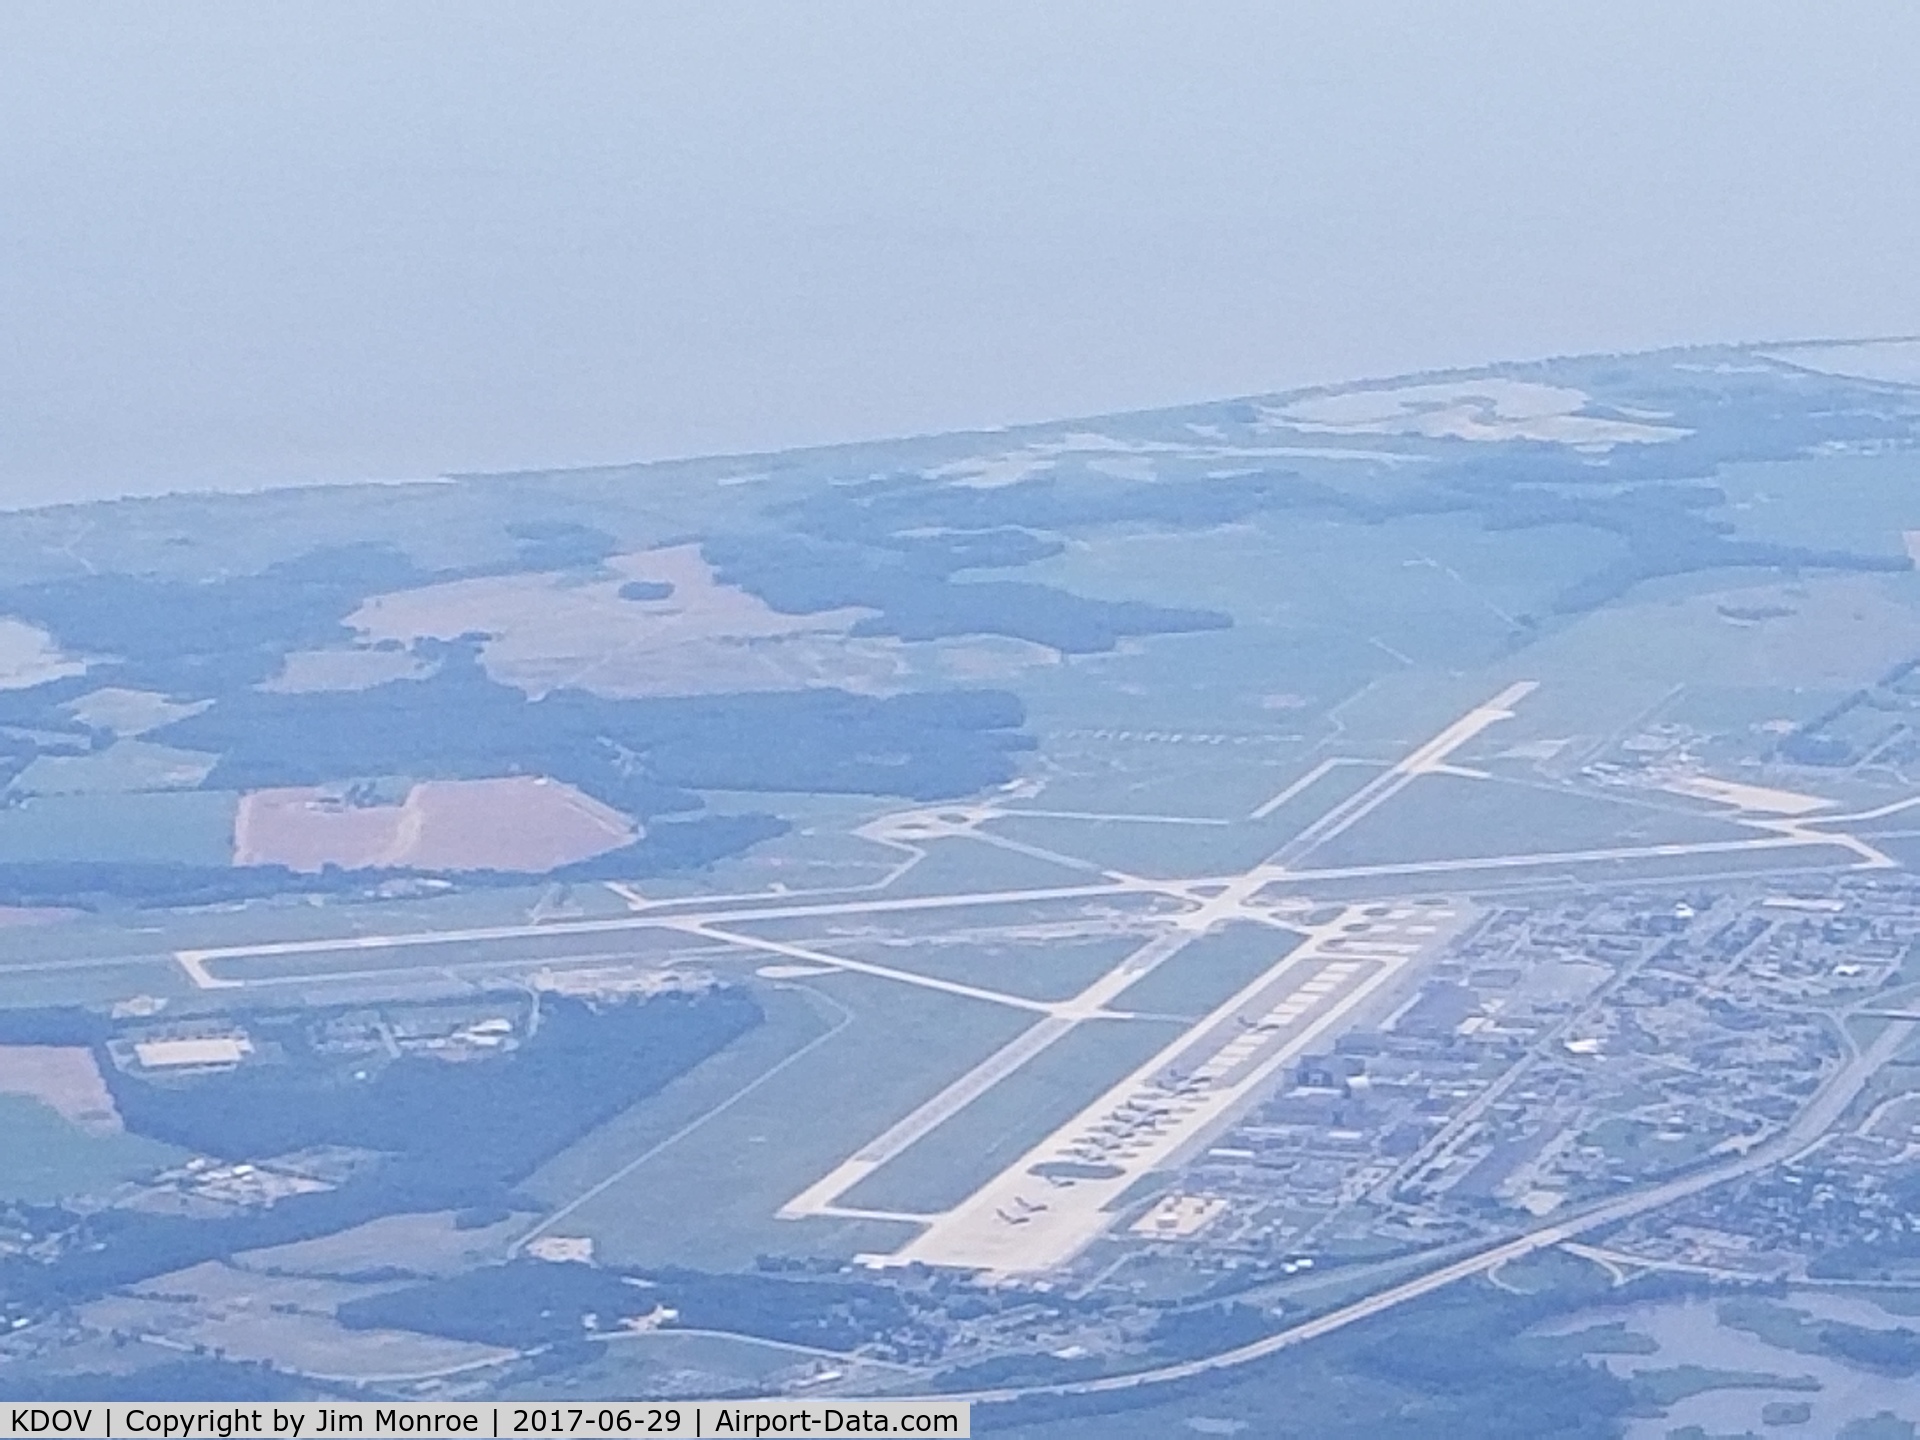 Dover Afb Airport (DOV) - From 9,500 feet looking East